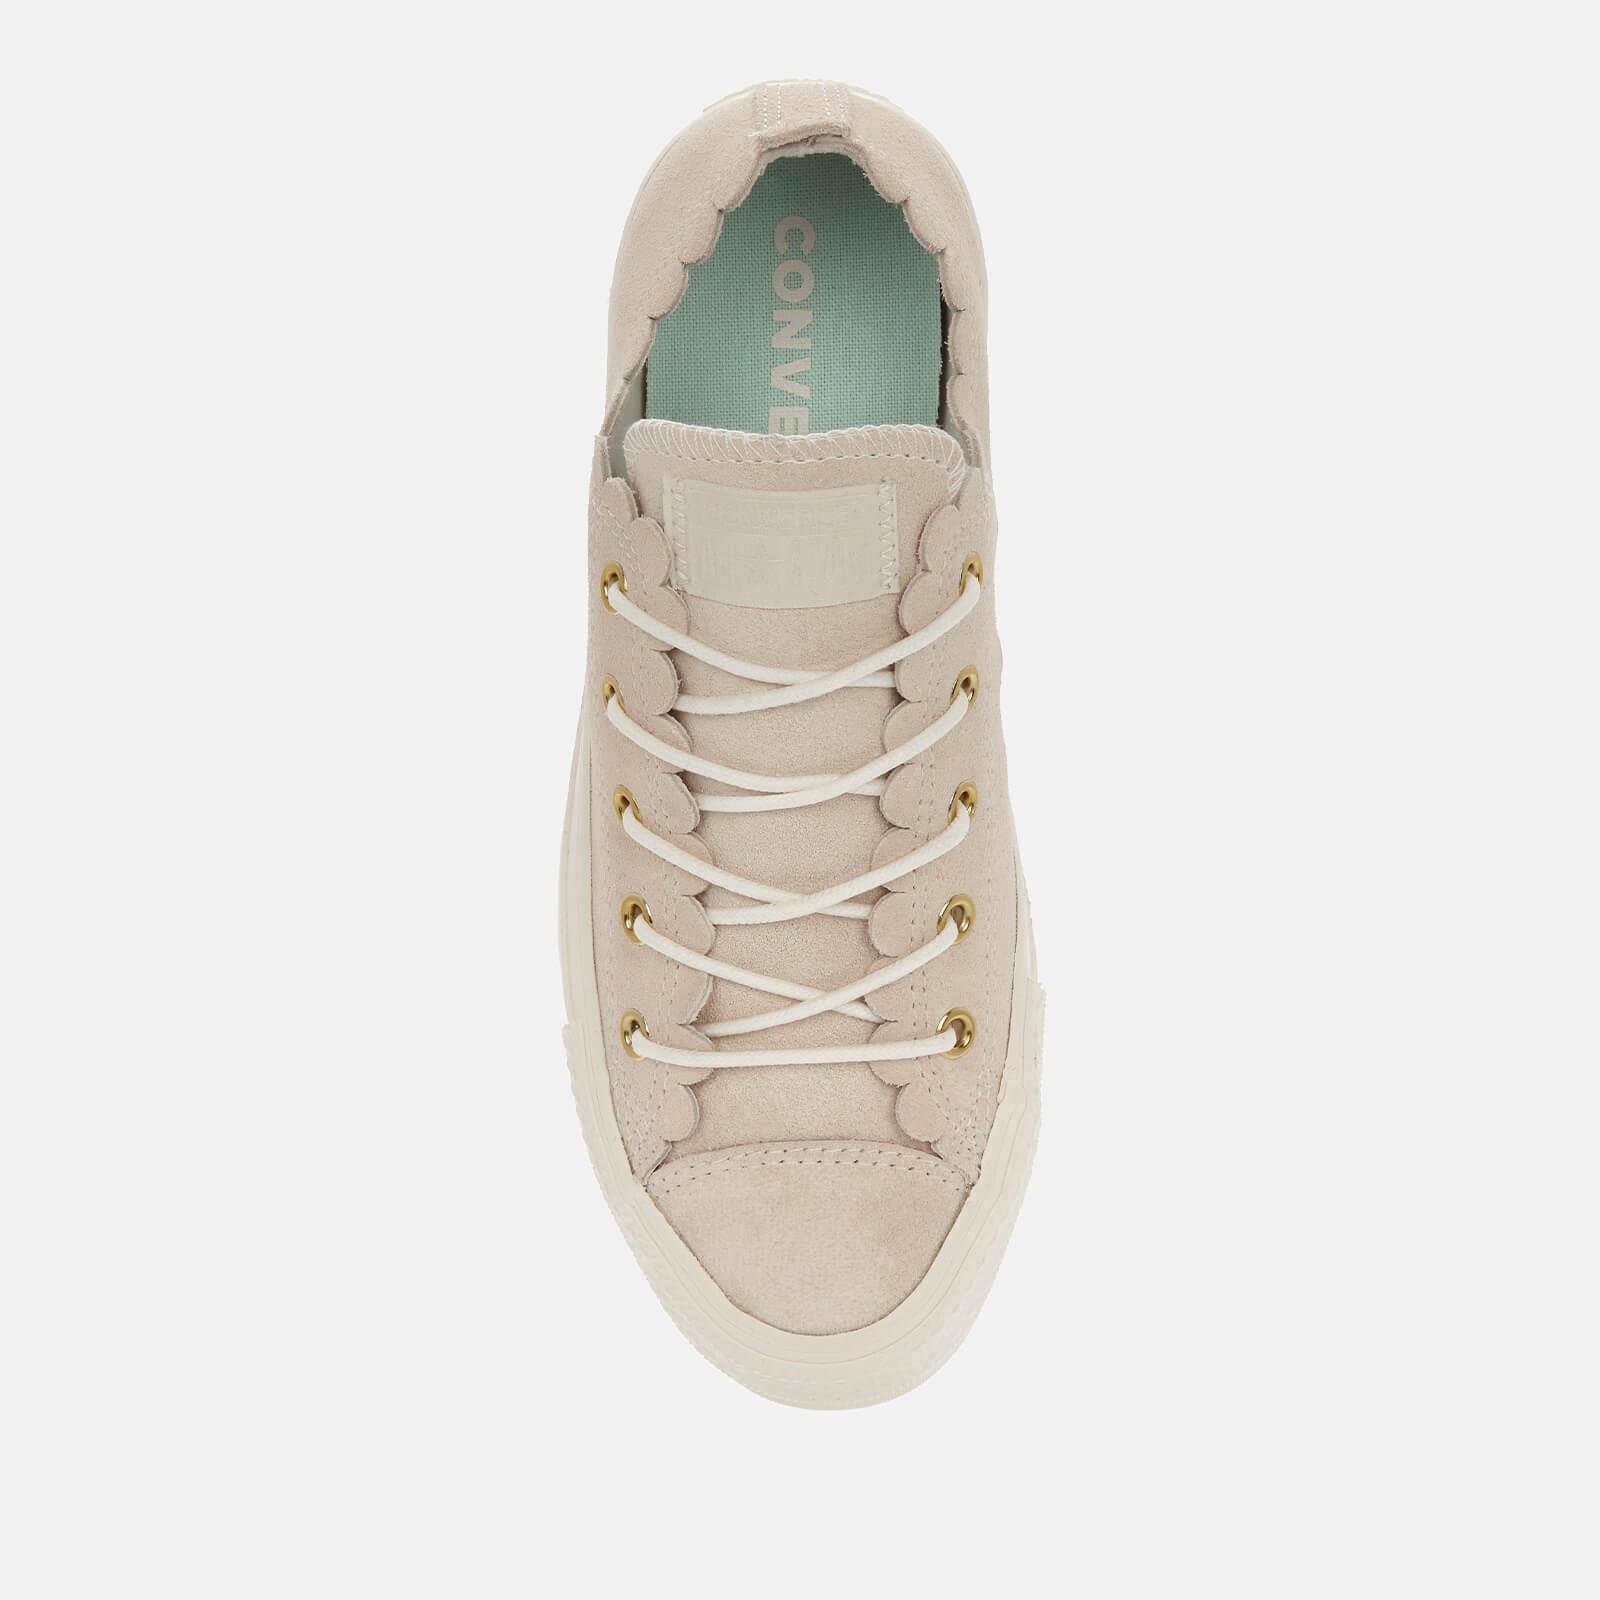 Converse Chuck Taylor All Star Scalloped Edge Ox Trainers | Lyst